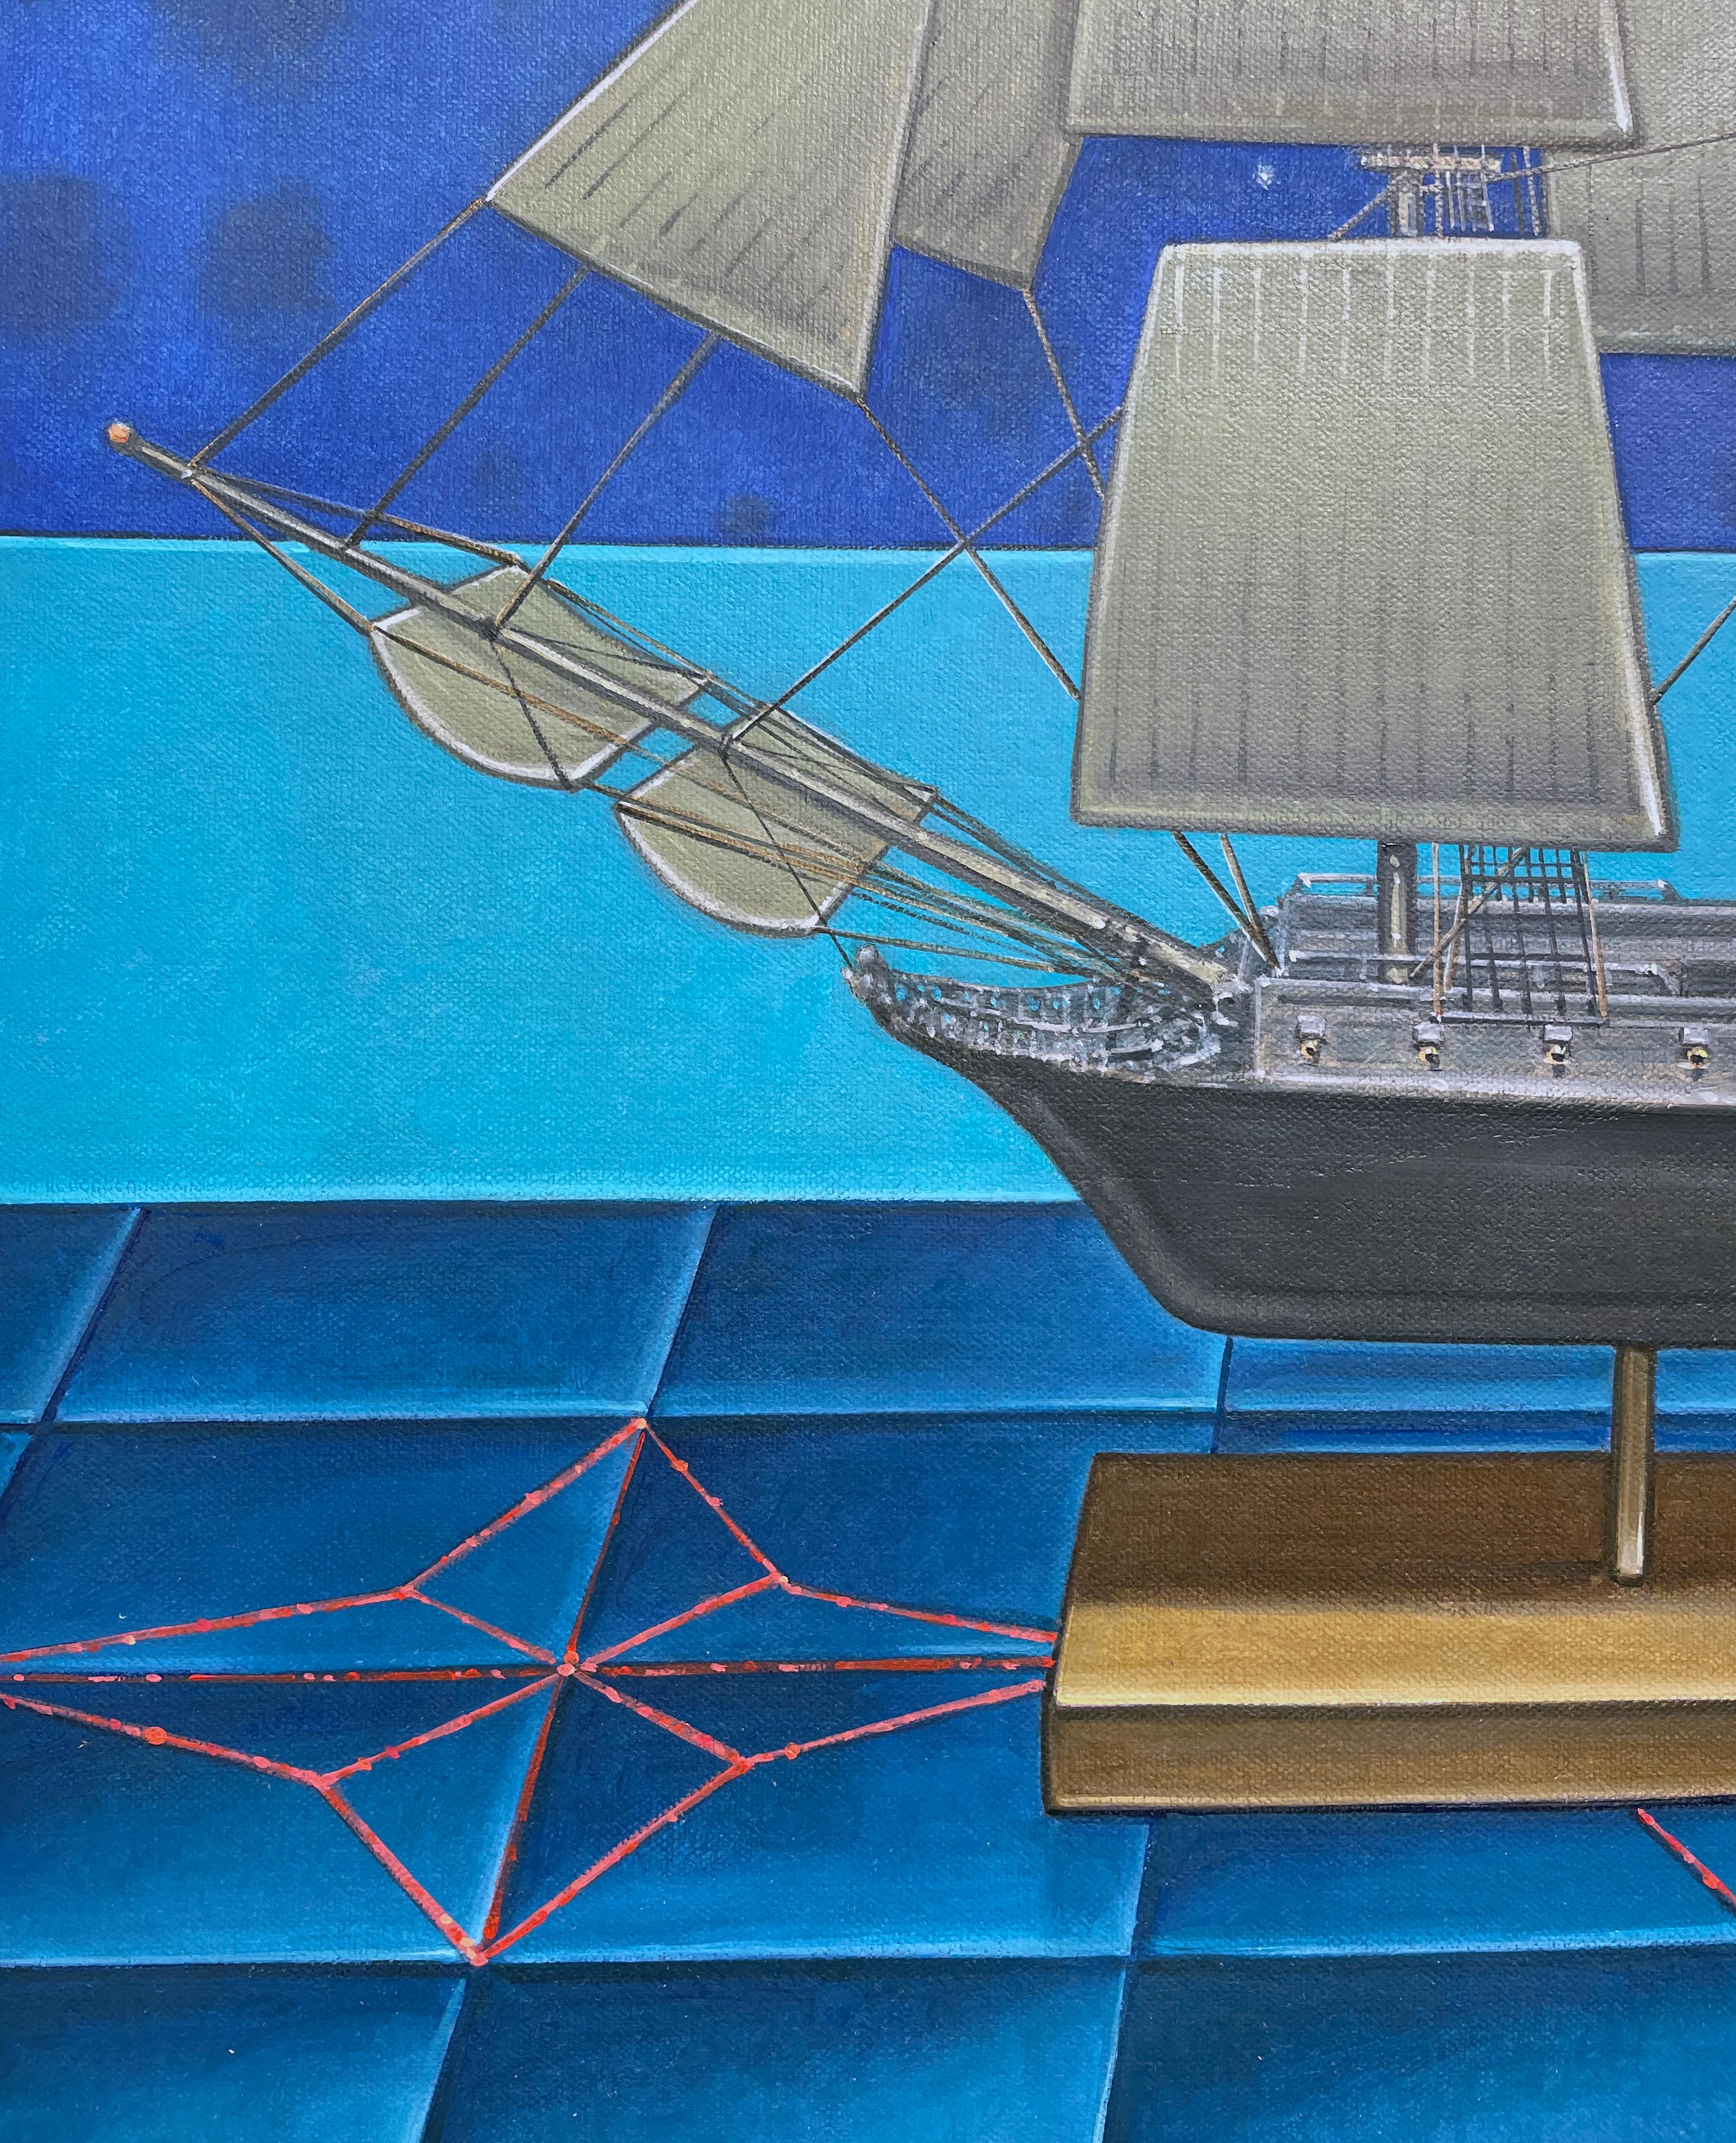 Night Crossing -  Model Pirate Ship and Constellations, Oil on Panel - Blue Landscape Painting by John Hrehov